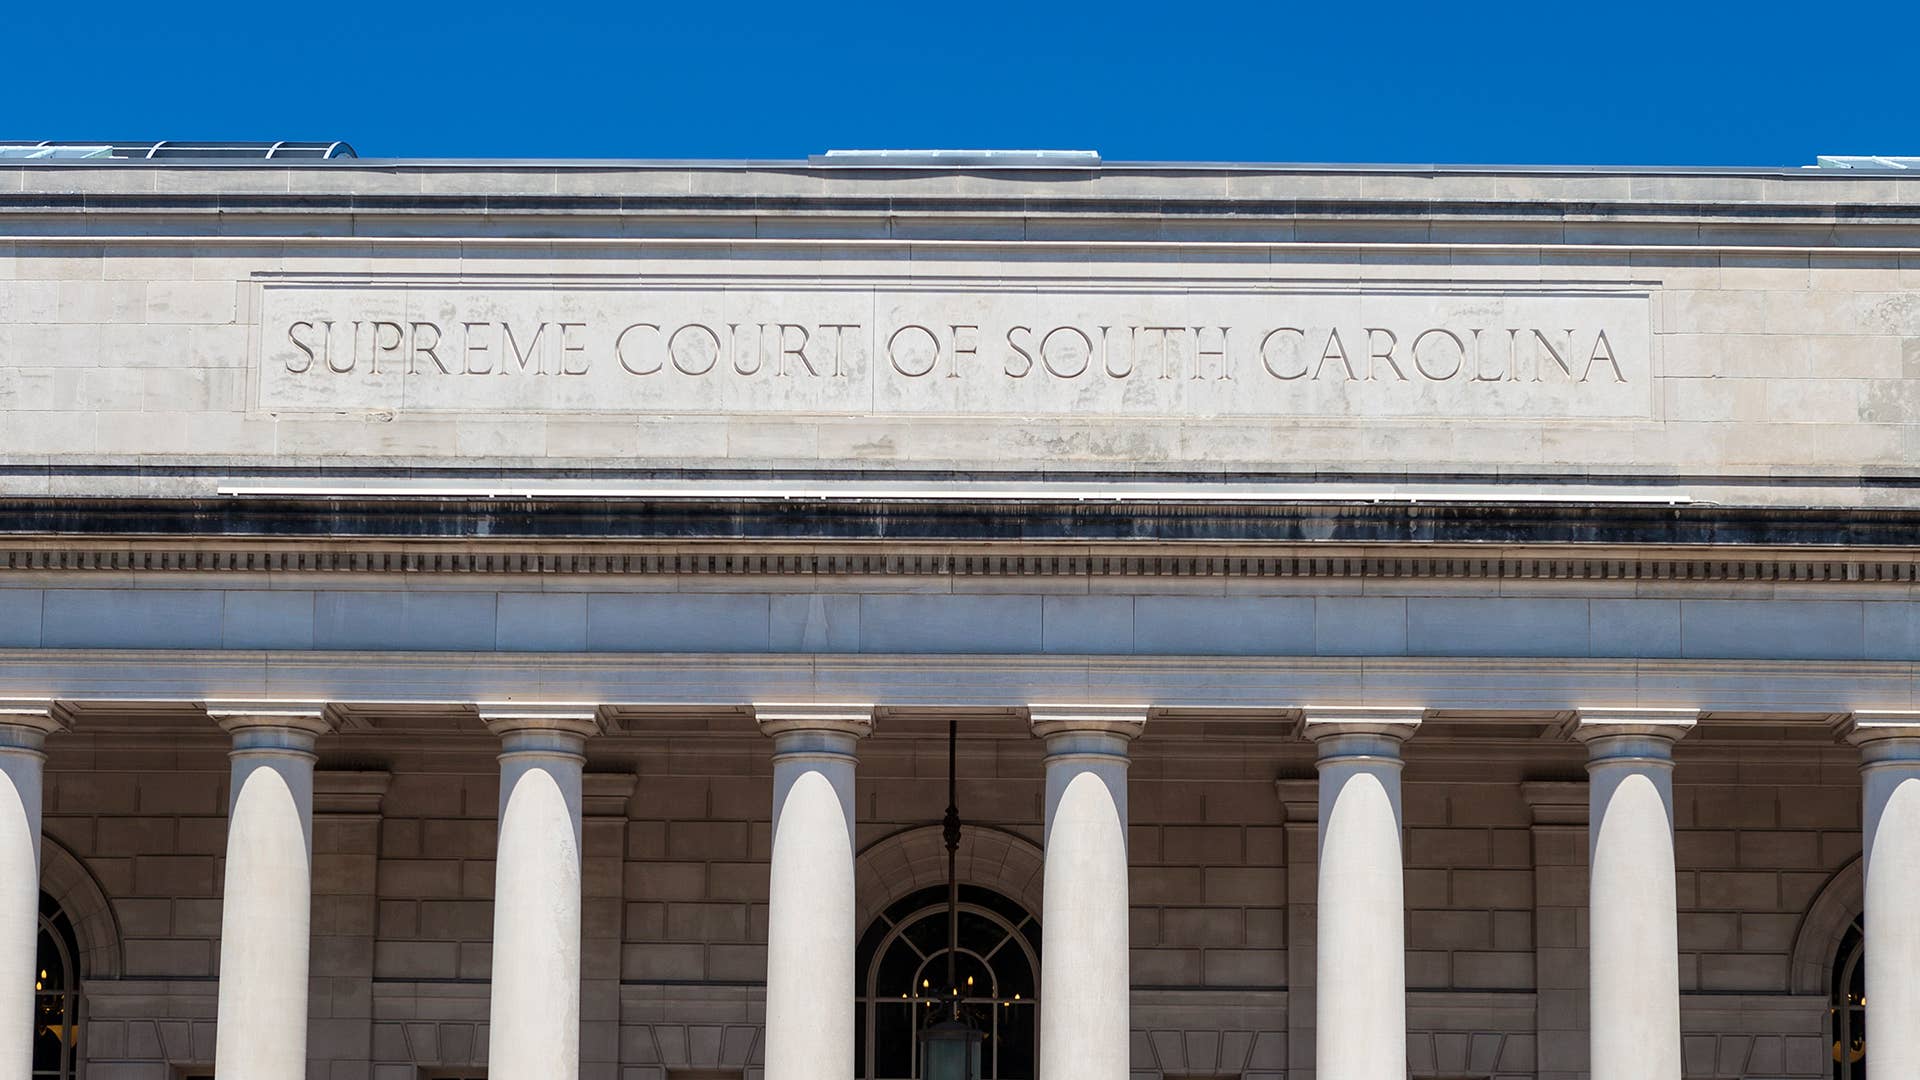 The Supreme Court of South Carolina in Columbia